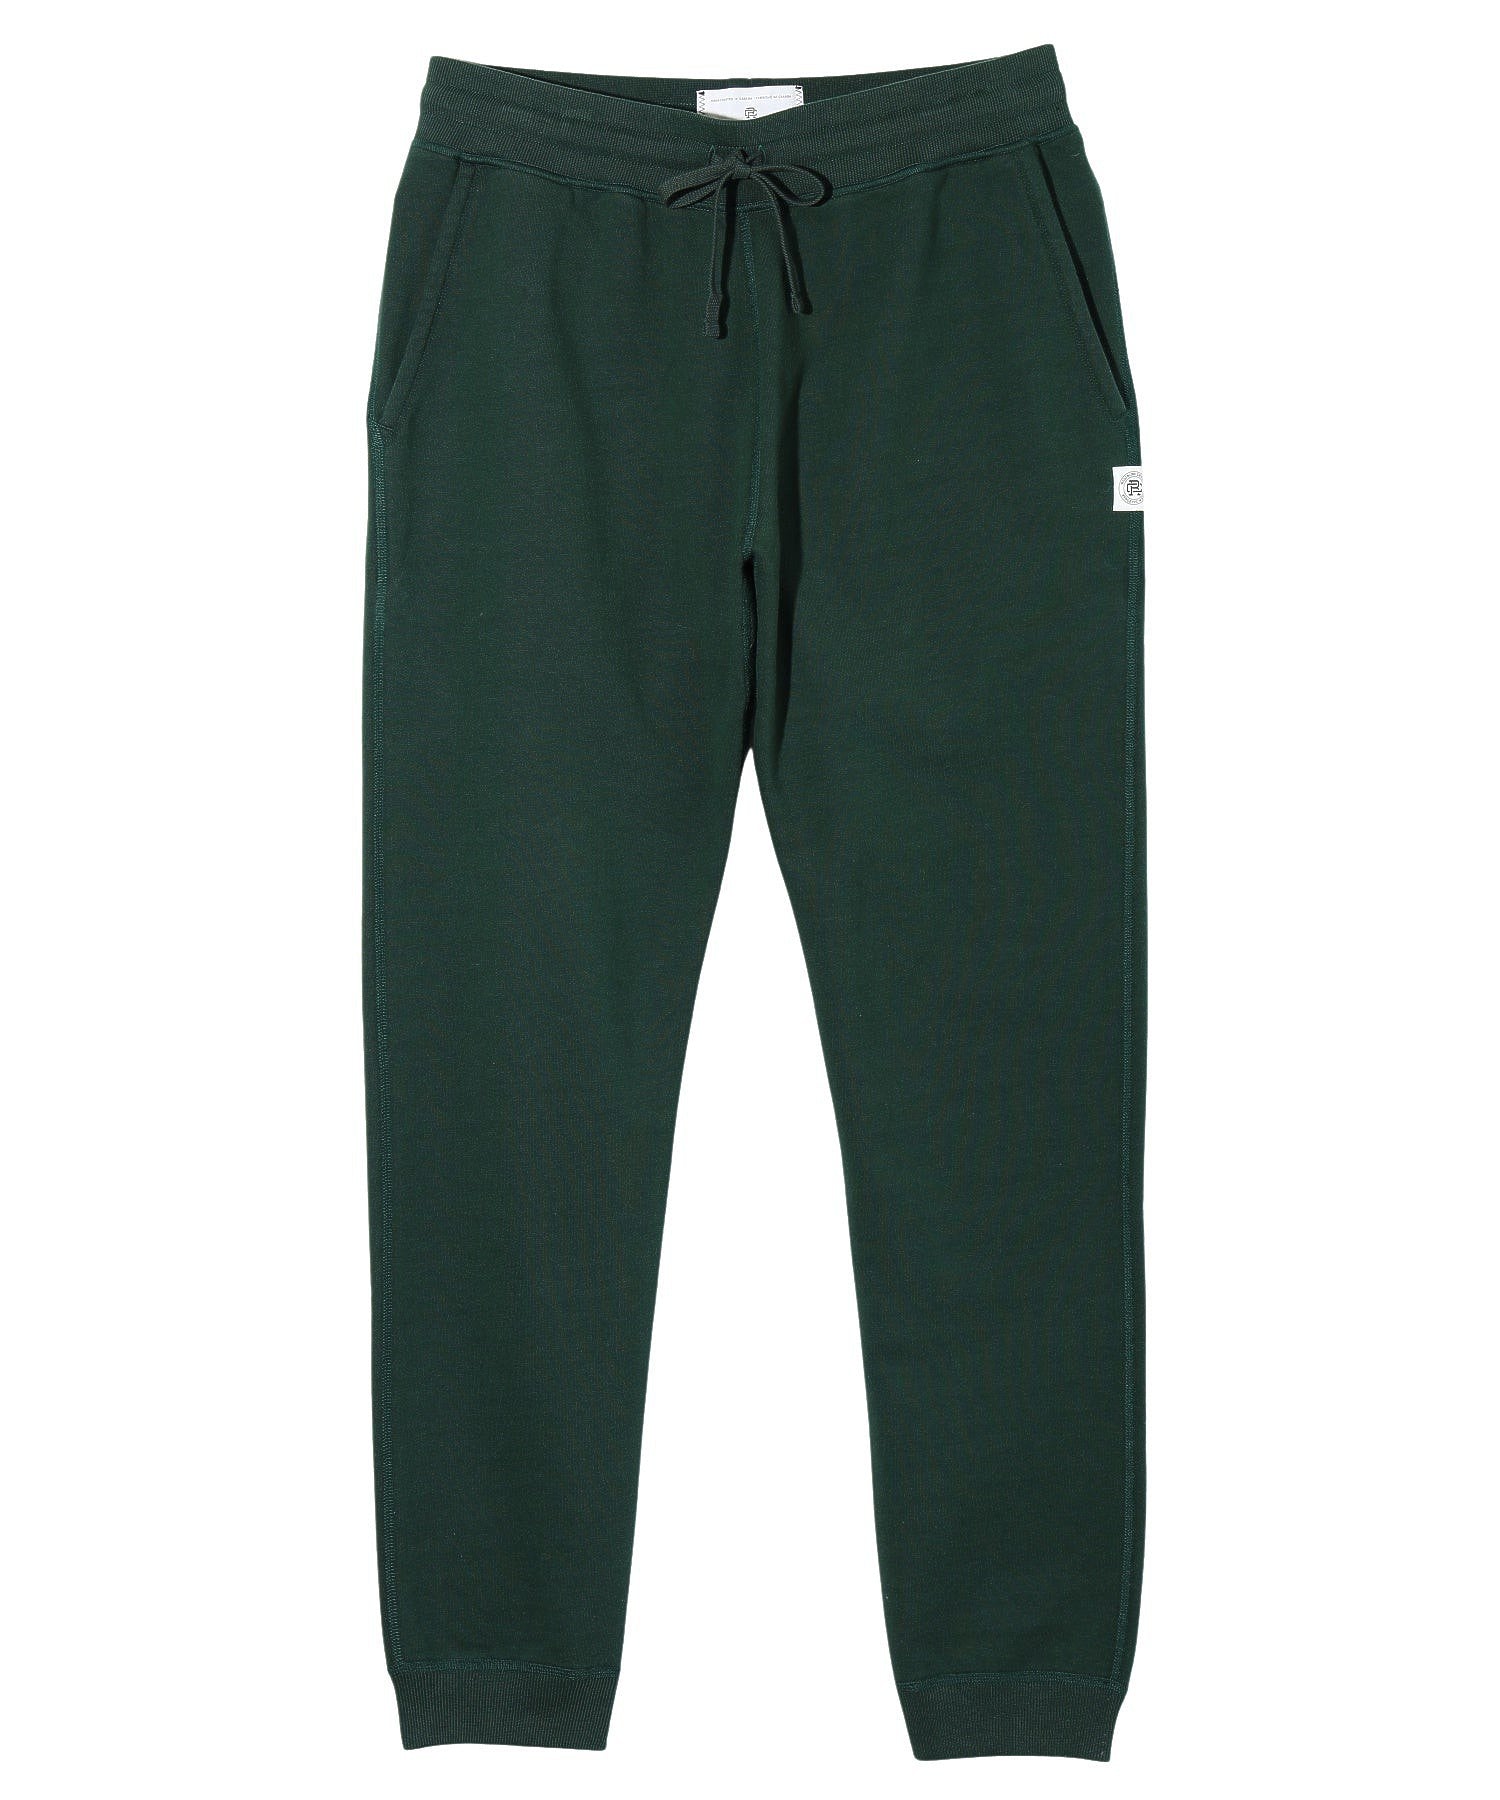 REIGNING CHAMP/レイニングチャンプ/MIDWEIGHT TERRY SLIM SWEATPANT/RC-5075